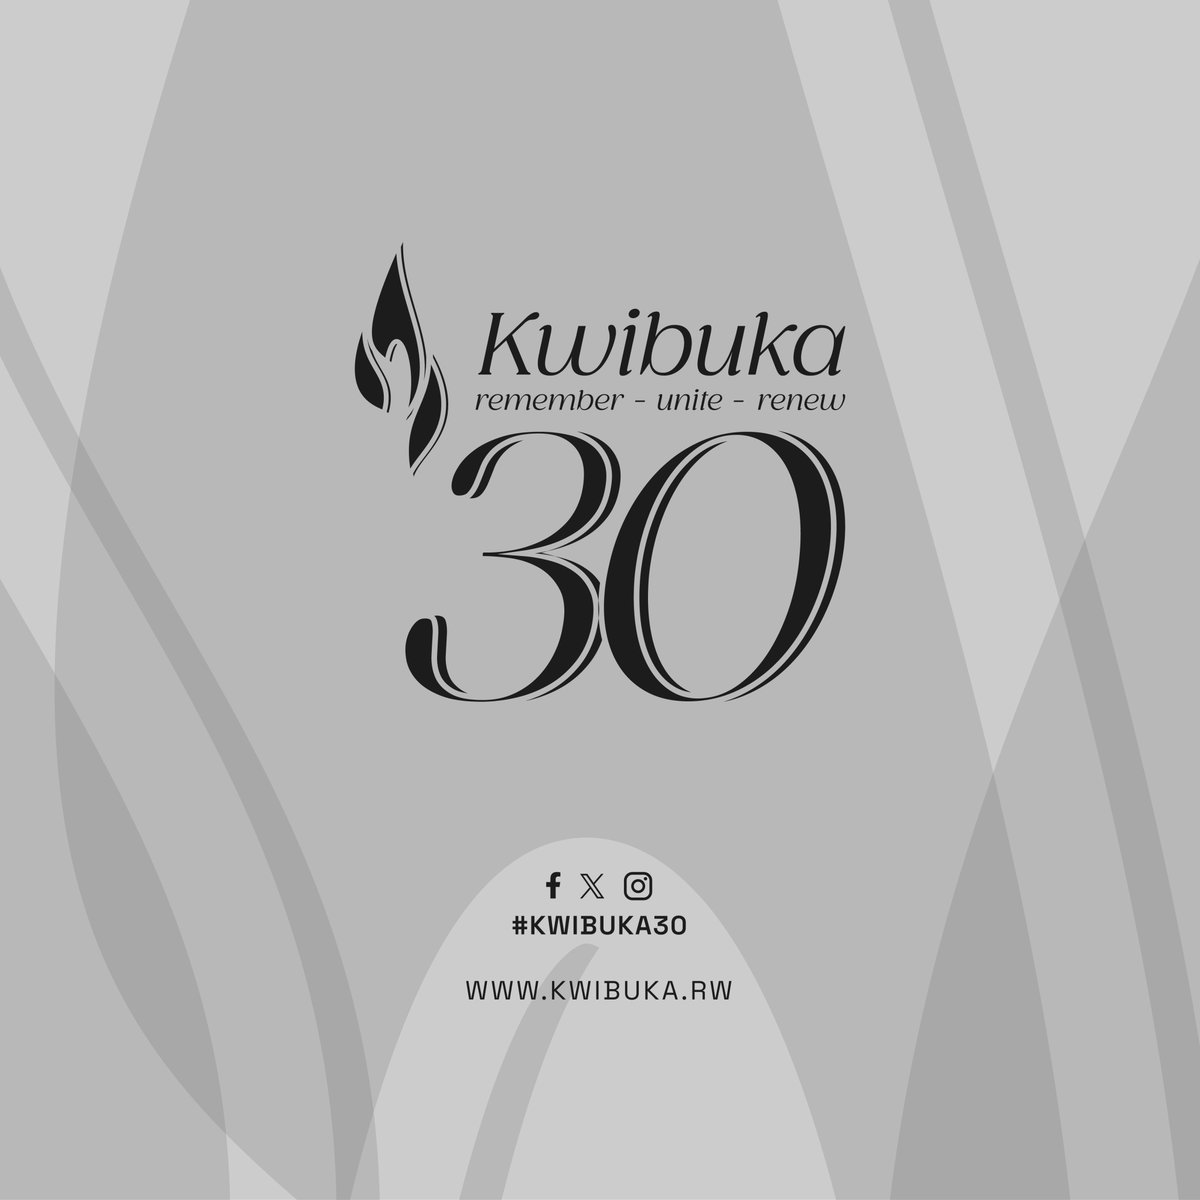 We stand with Rwandans and friends of Rwanda commemorating the genocide against the Tutsi. Let's unite against genocide ideology and work to prevent this crime against Humanity. 'Remember, Unite, Renew' #Kwibuka30